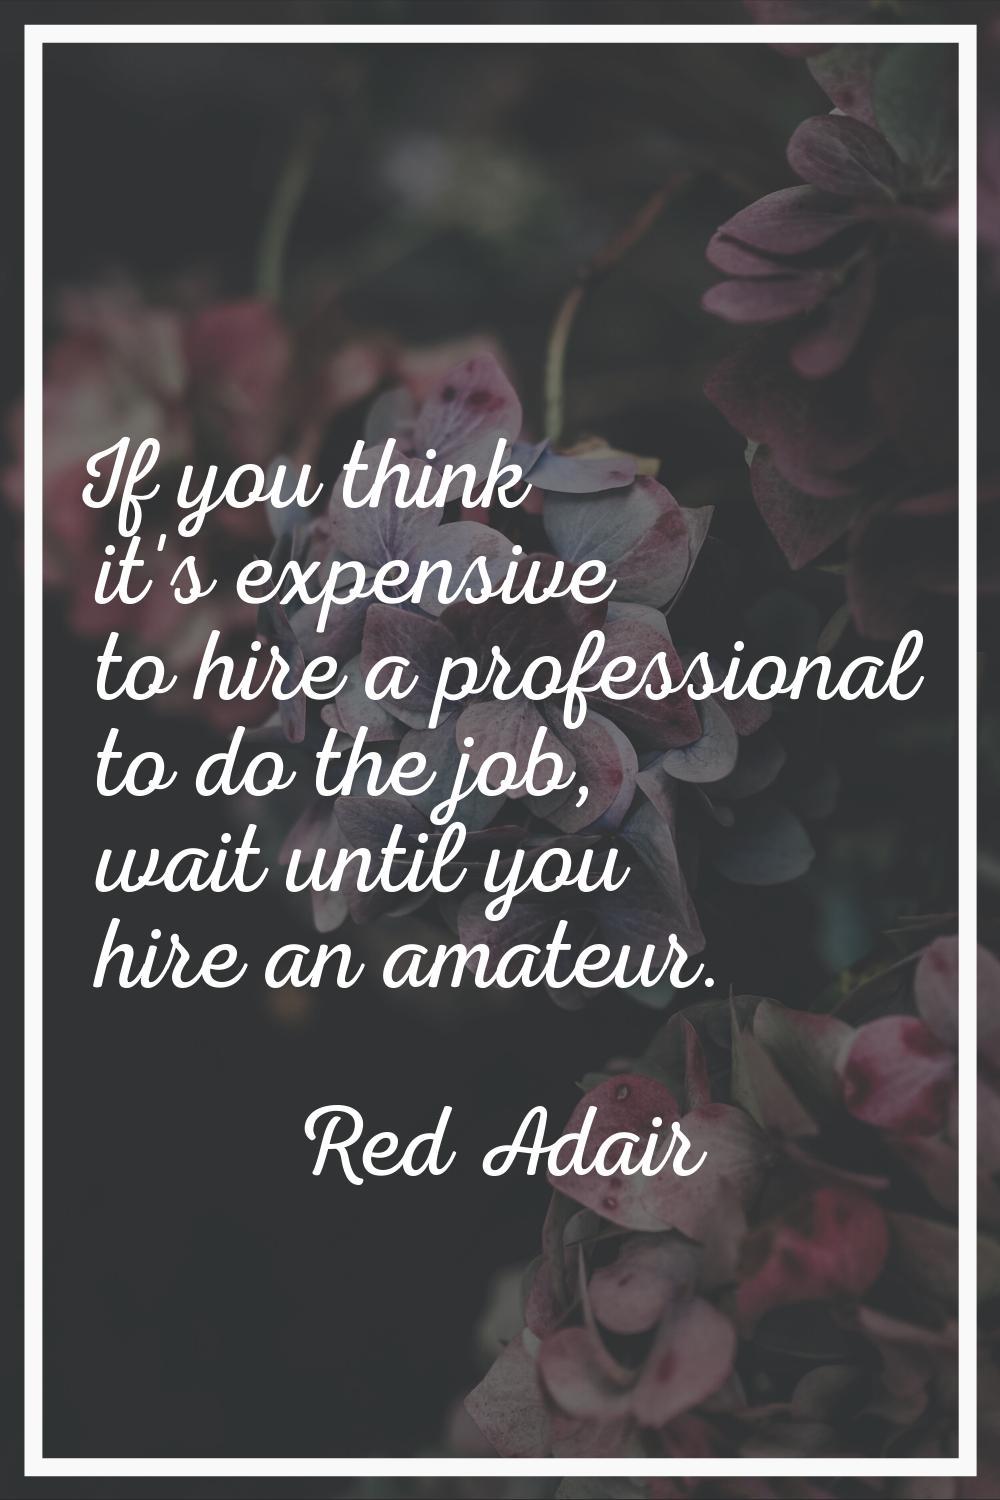 If you think it's expensive to hire a professional to do the job, wait until you hire an amateur.